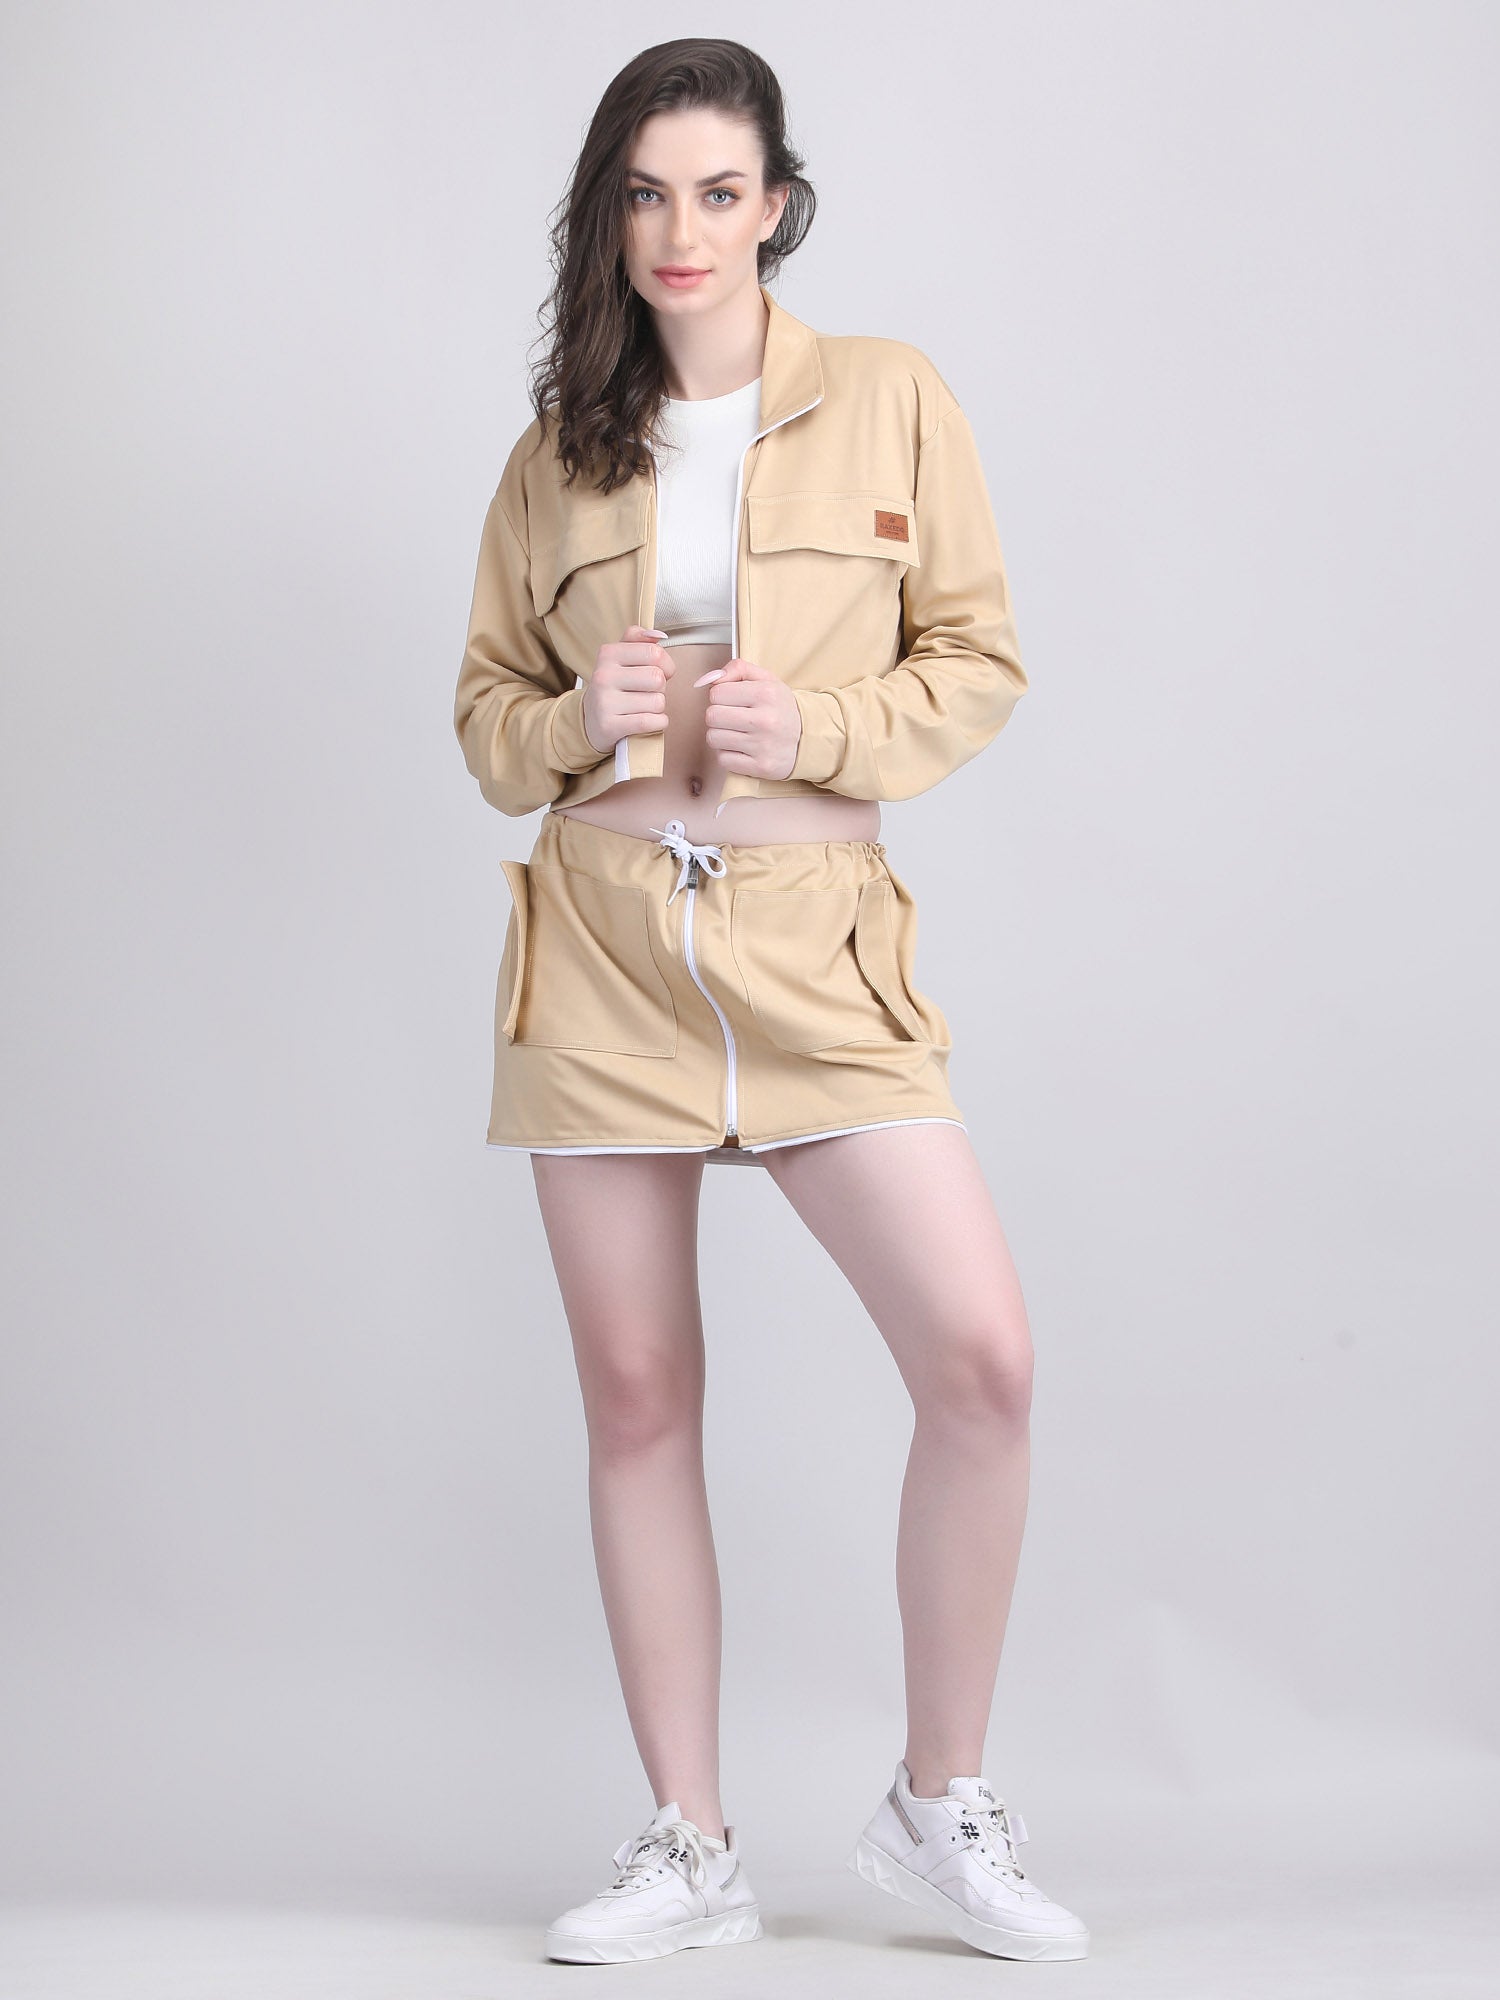 Women's 4-in-1 Convertible Jacket with Detachable Skirt